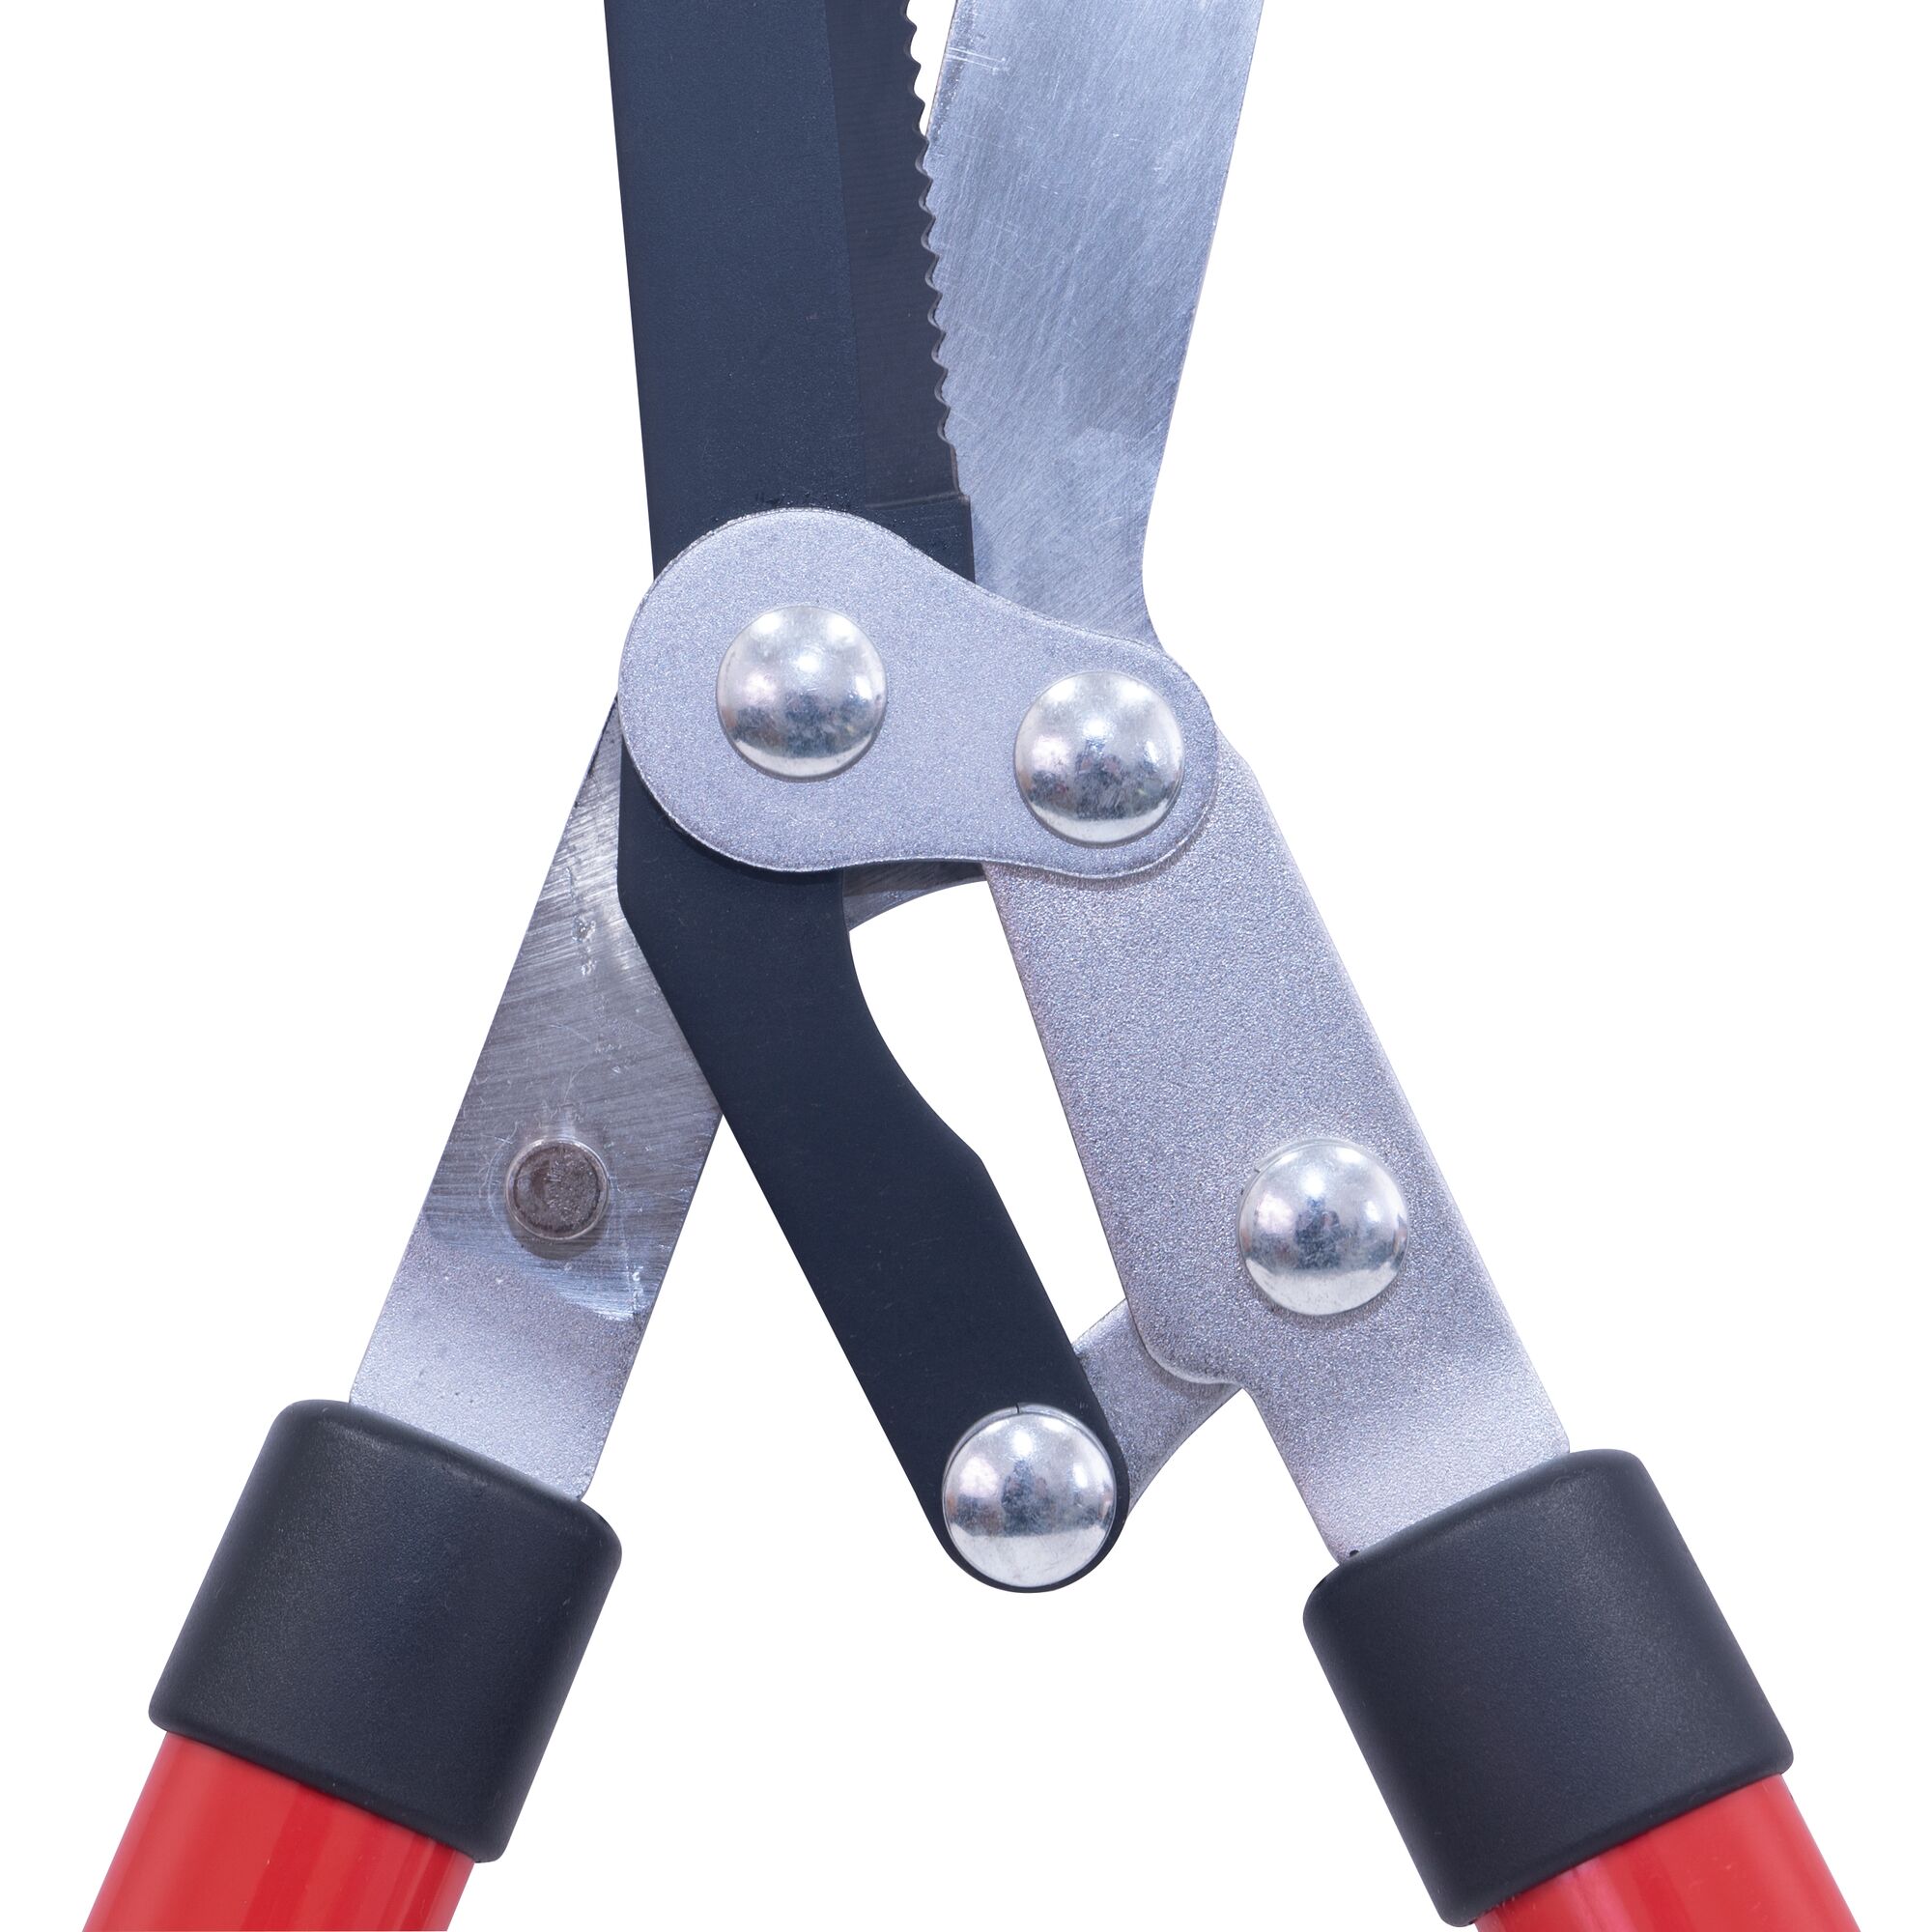 Close up of hedge shears with compound action blade.